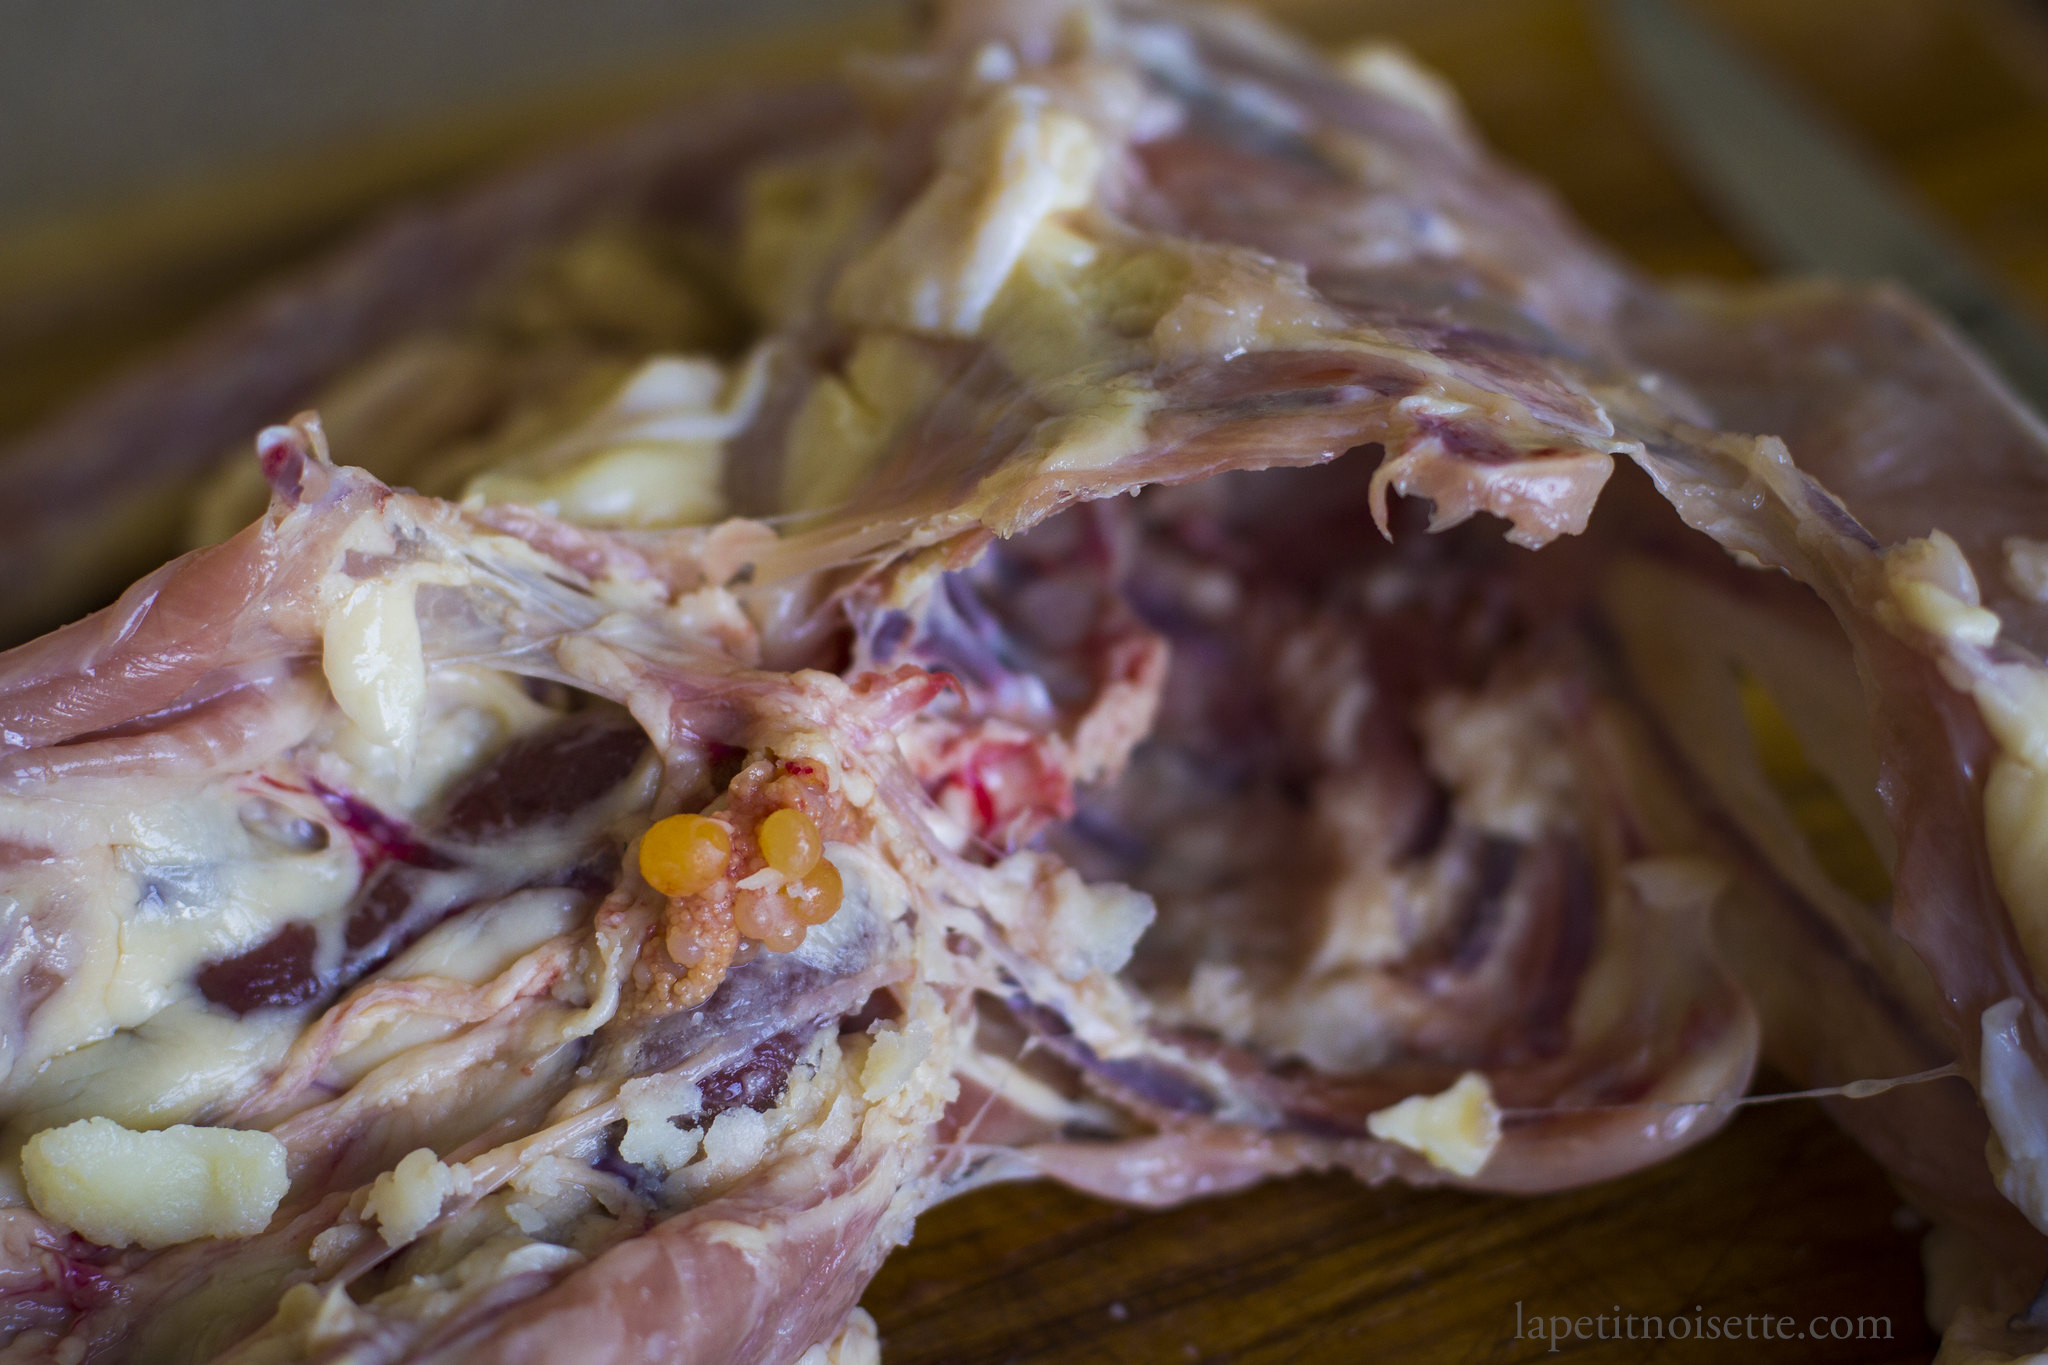 The formation of egg yolks inside a chicken carcass.